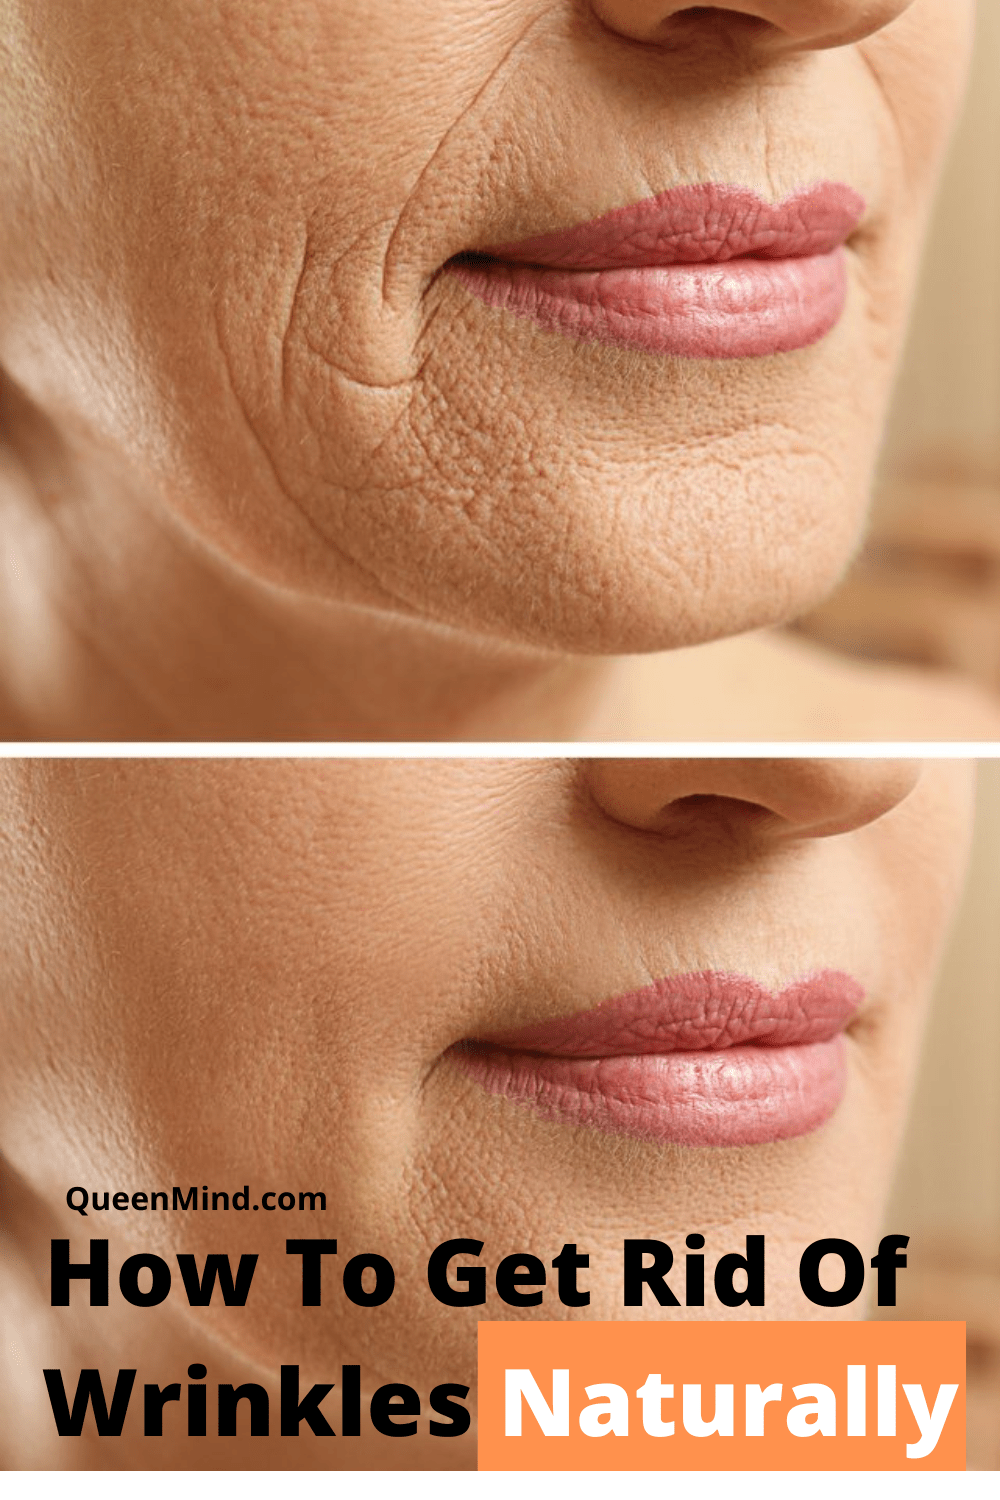 How To Get Rid Of Wrinkles Naturally